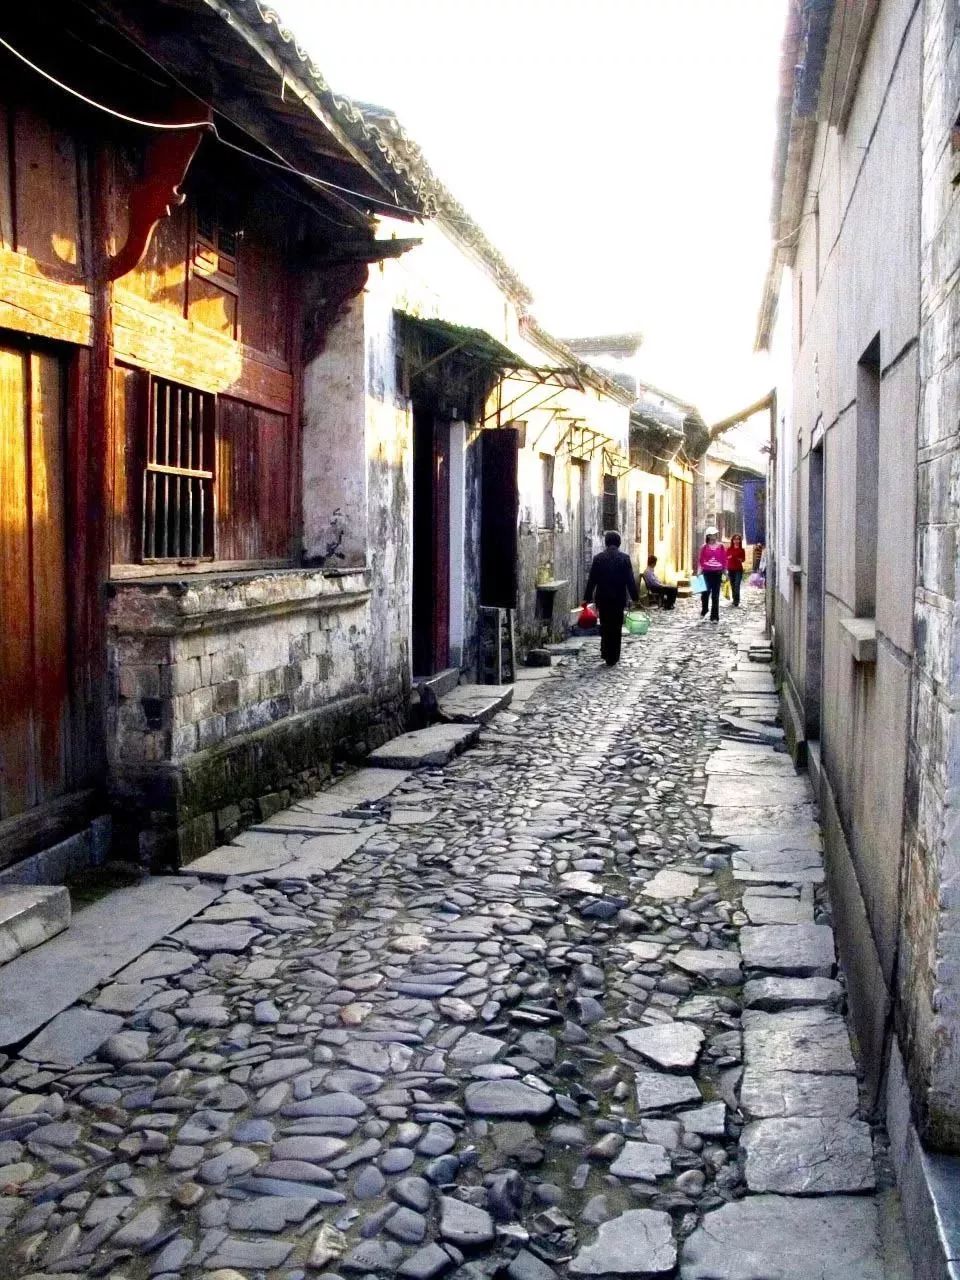 How many of the 20 most beautiful niche travel destinations in China have you been to? (superior)